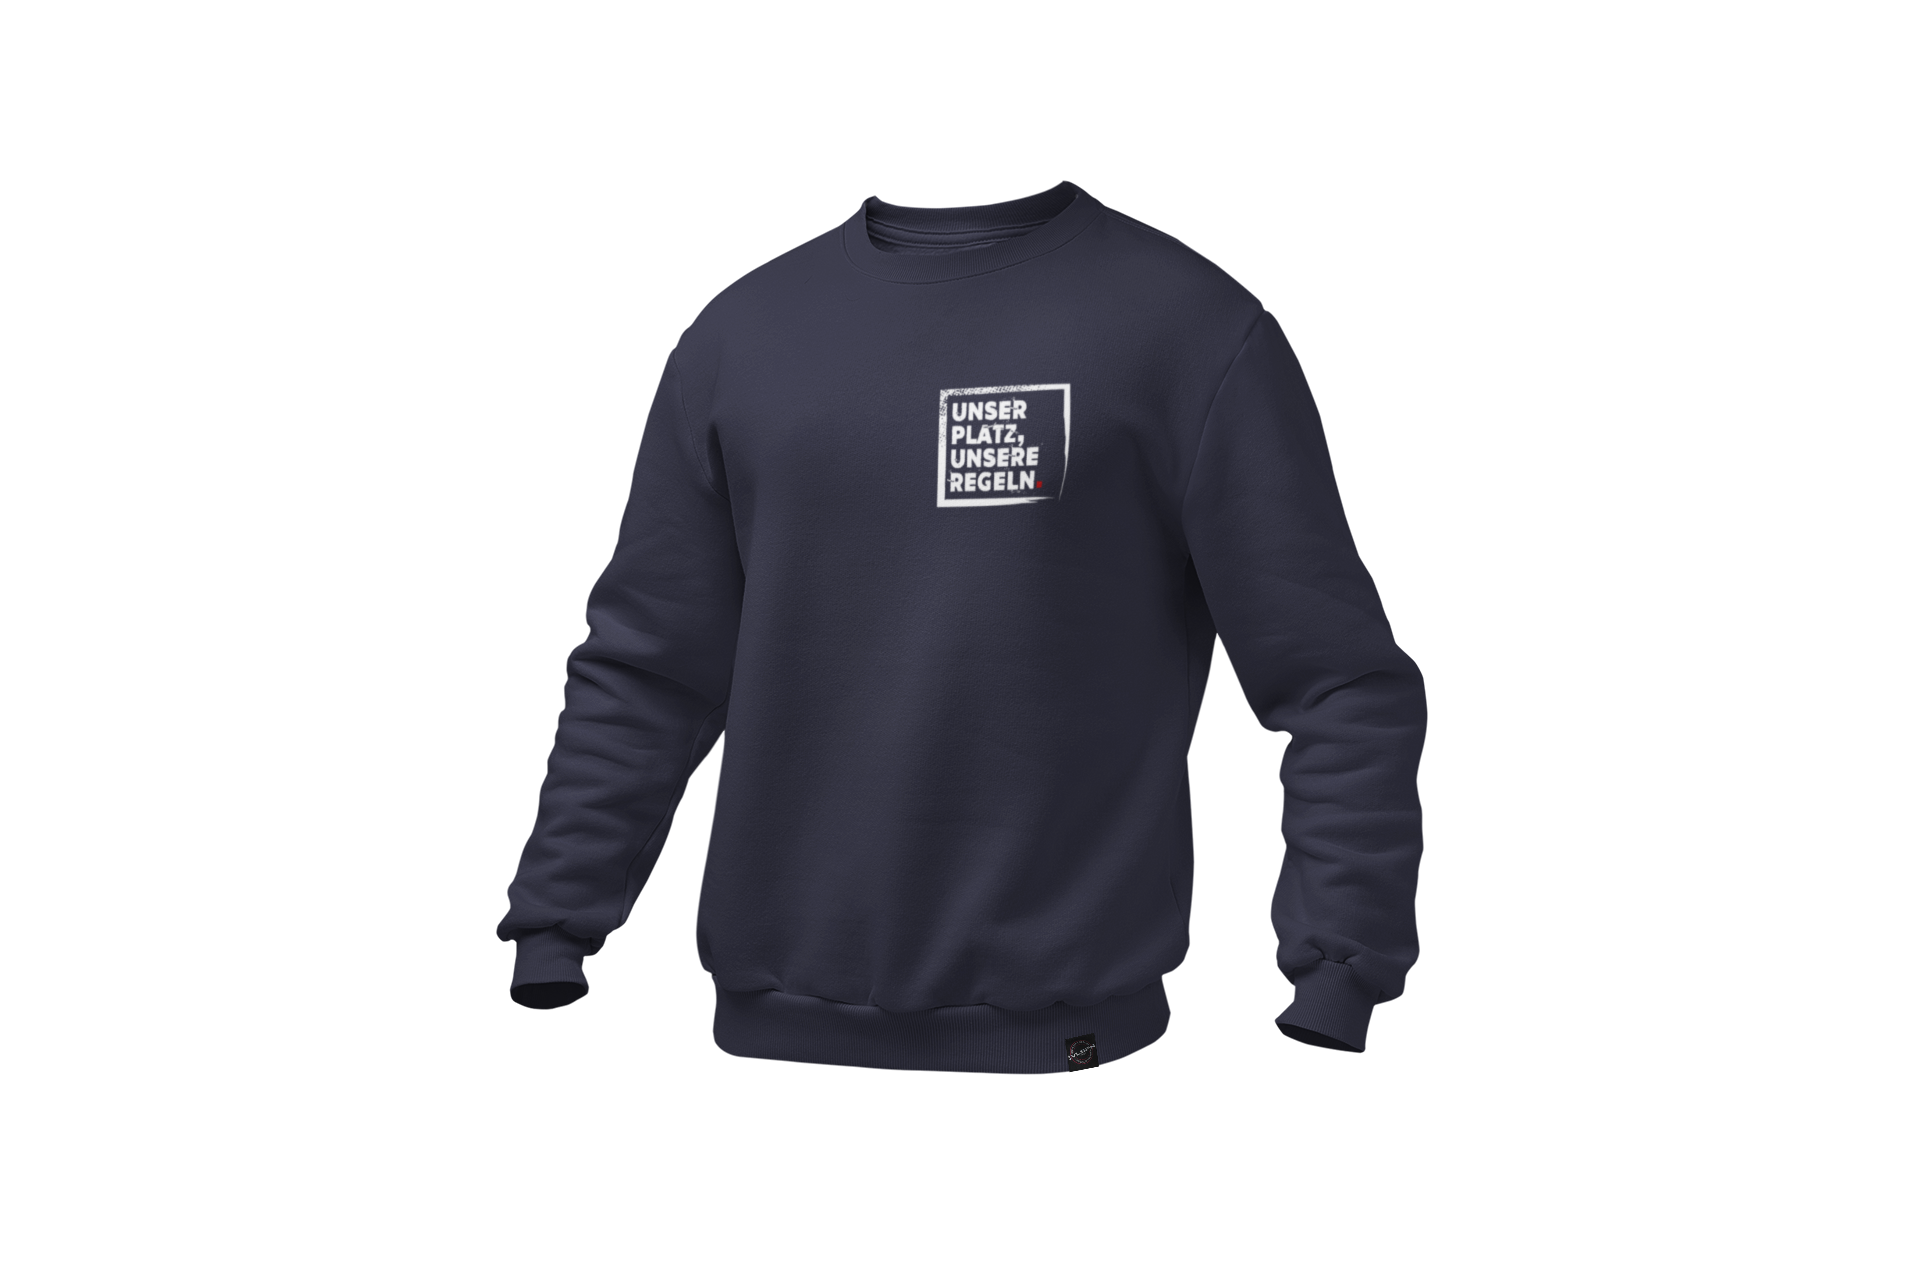 mockup-of-a-ghosted-crewneck-sweatshirt-over-a-solid-background-26960 - 2021-02-09T160157.917.png